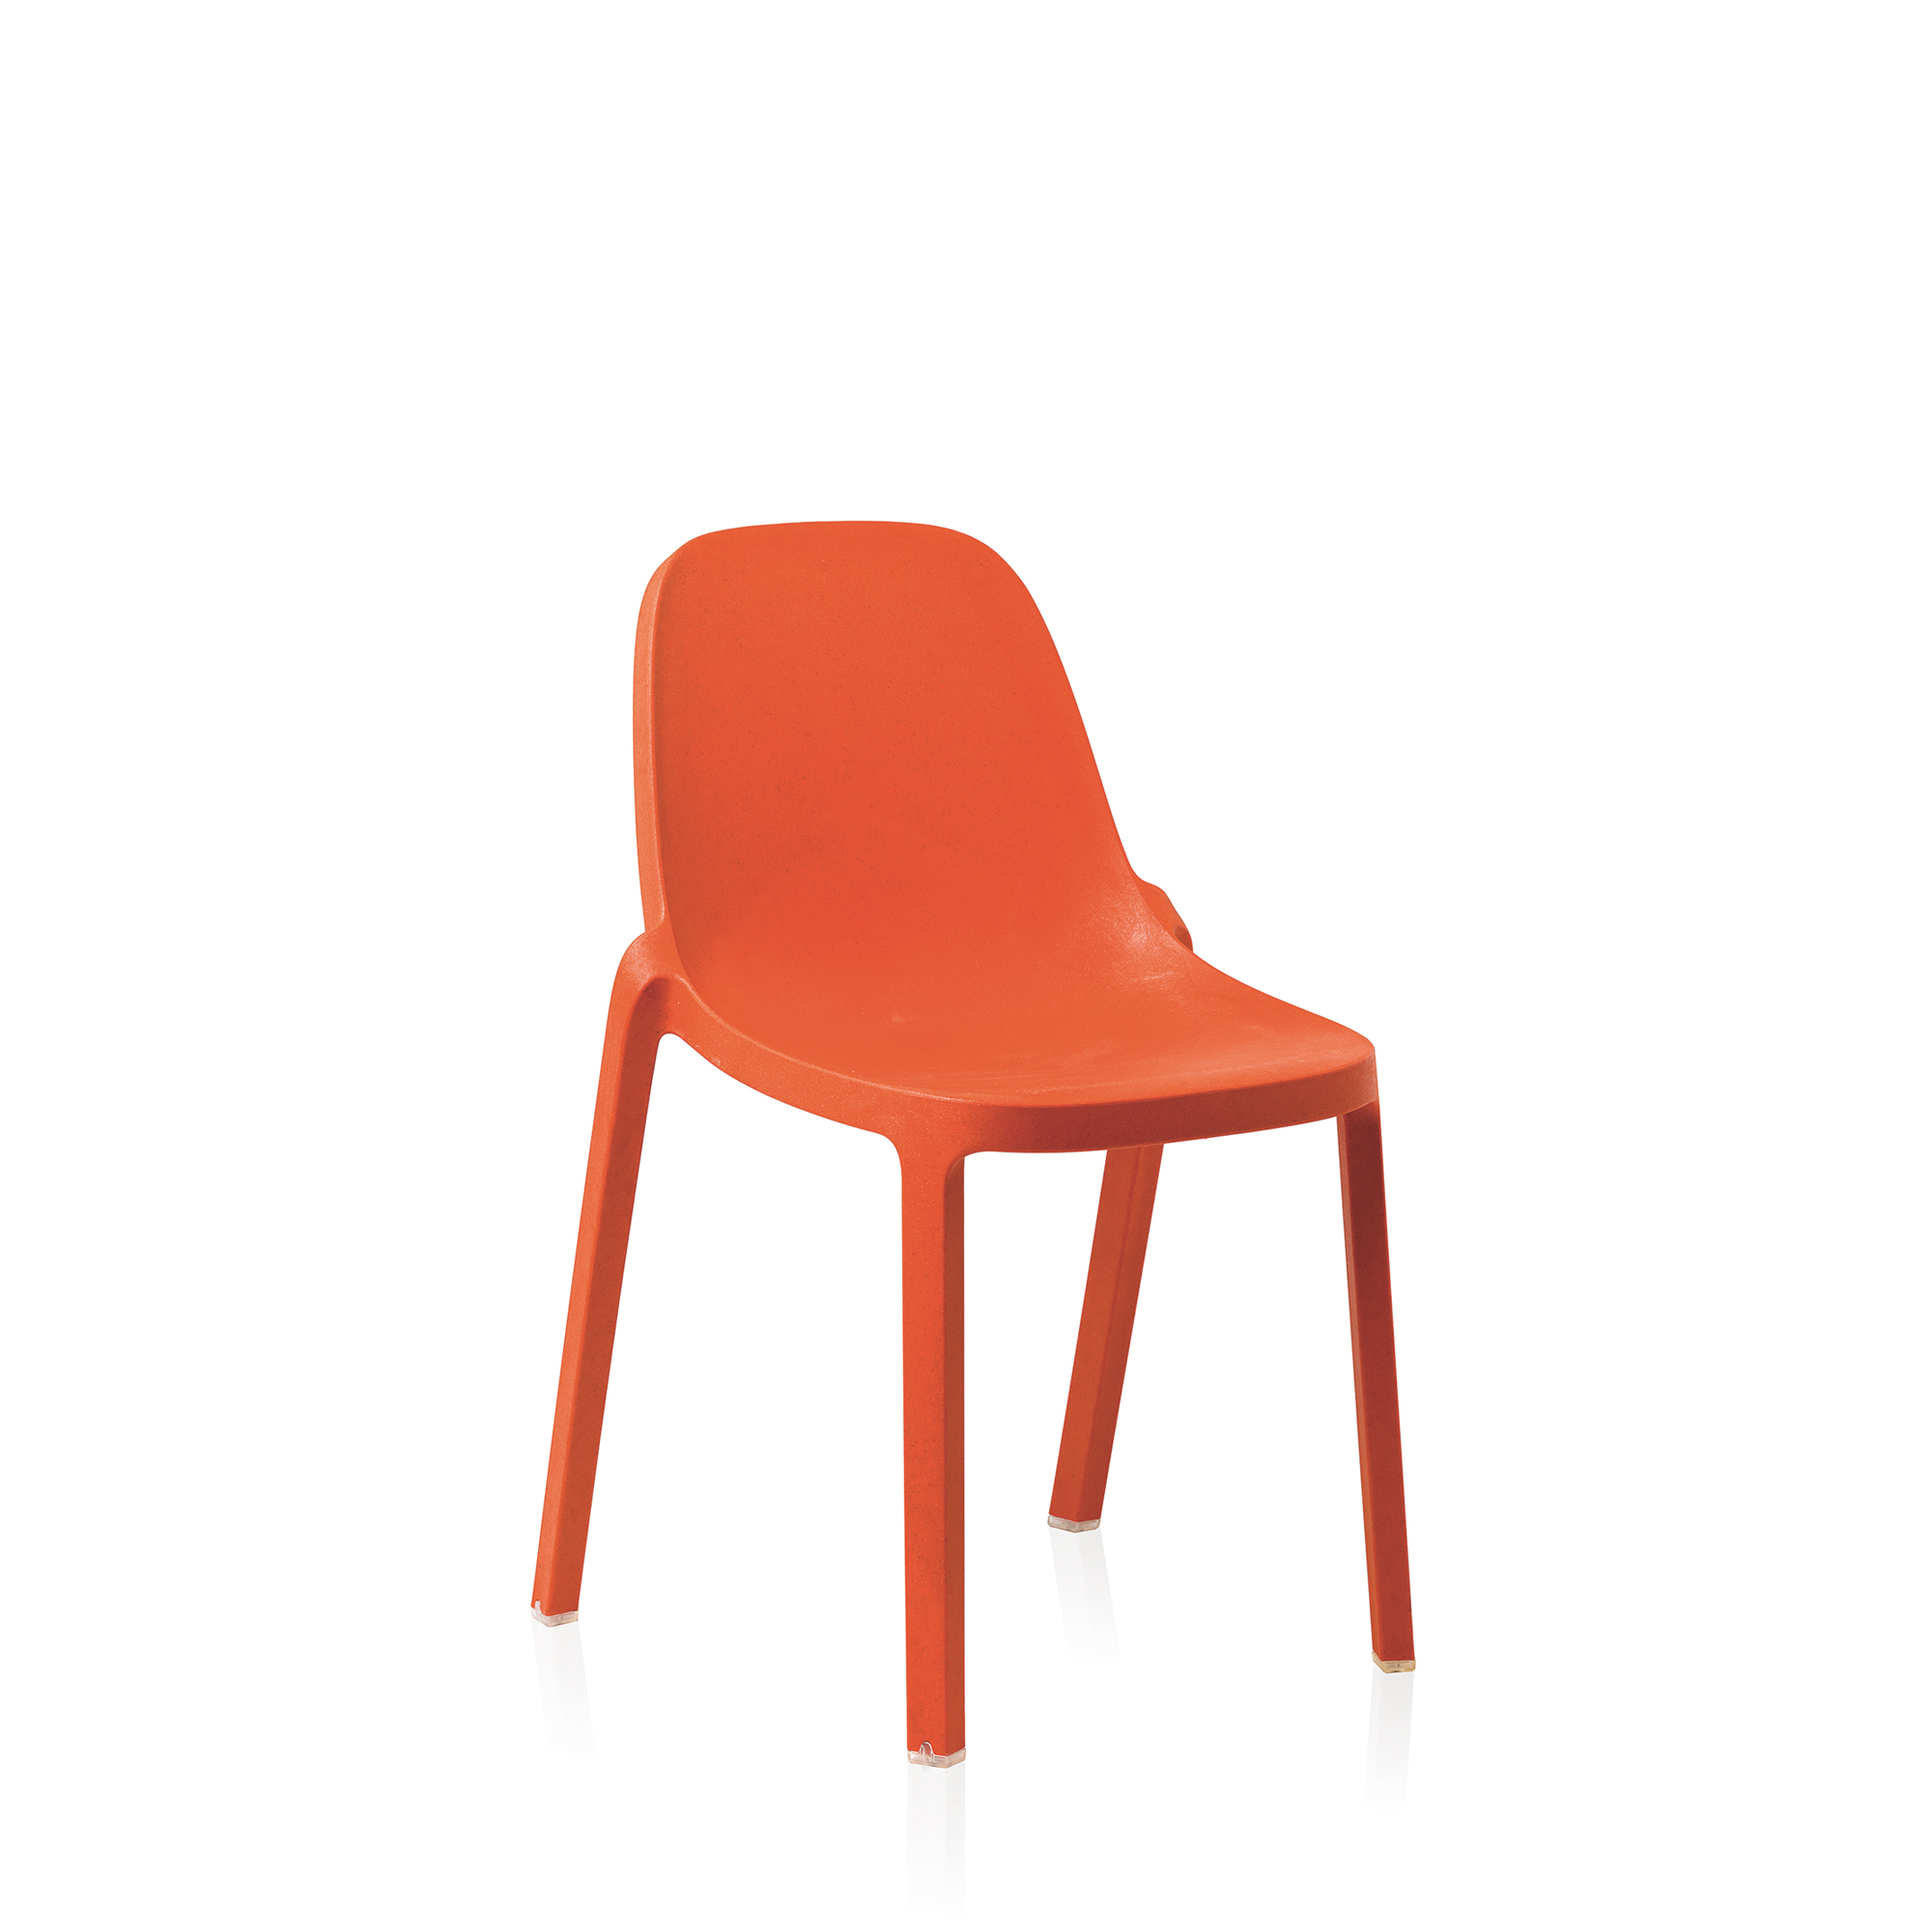 Broom Stacking Chair by Phillip Starck